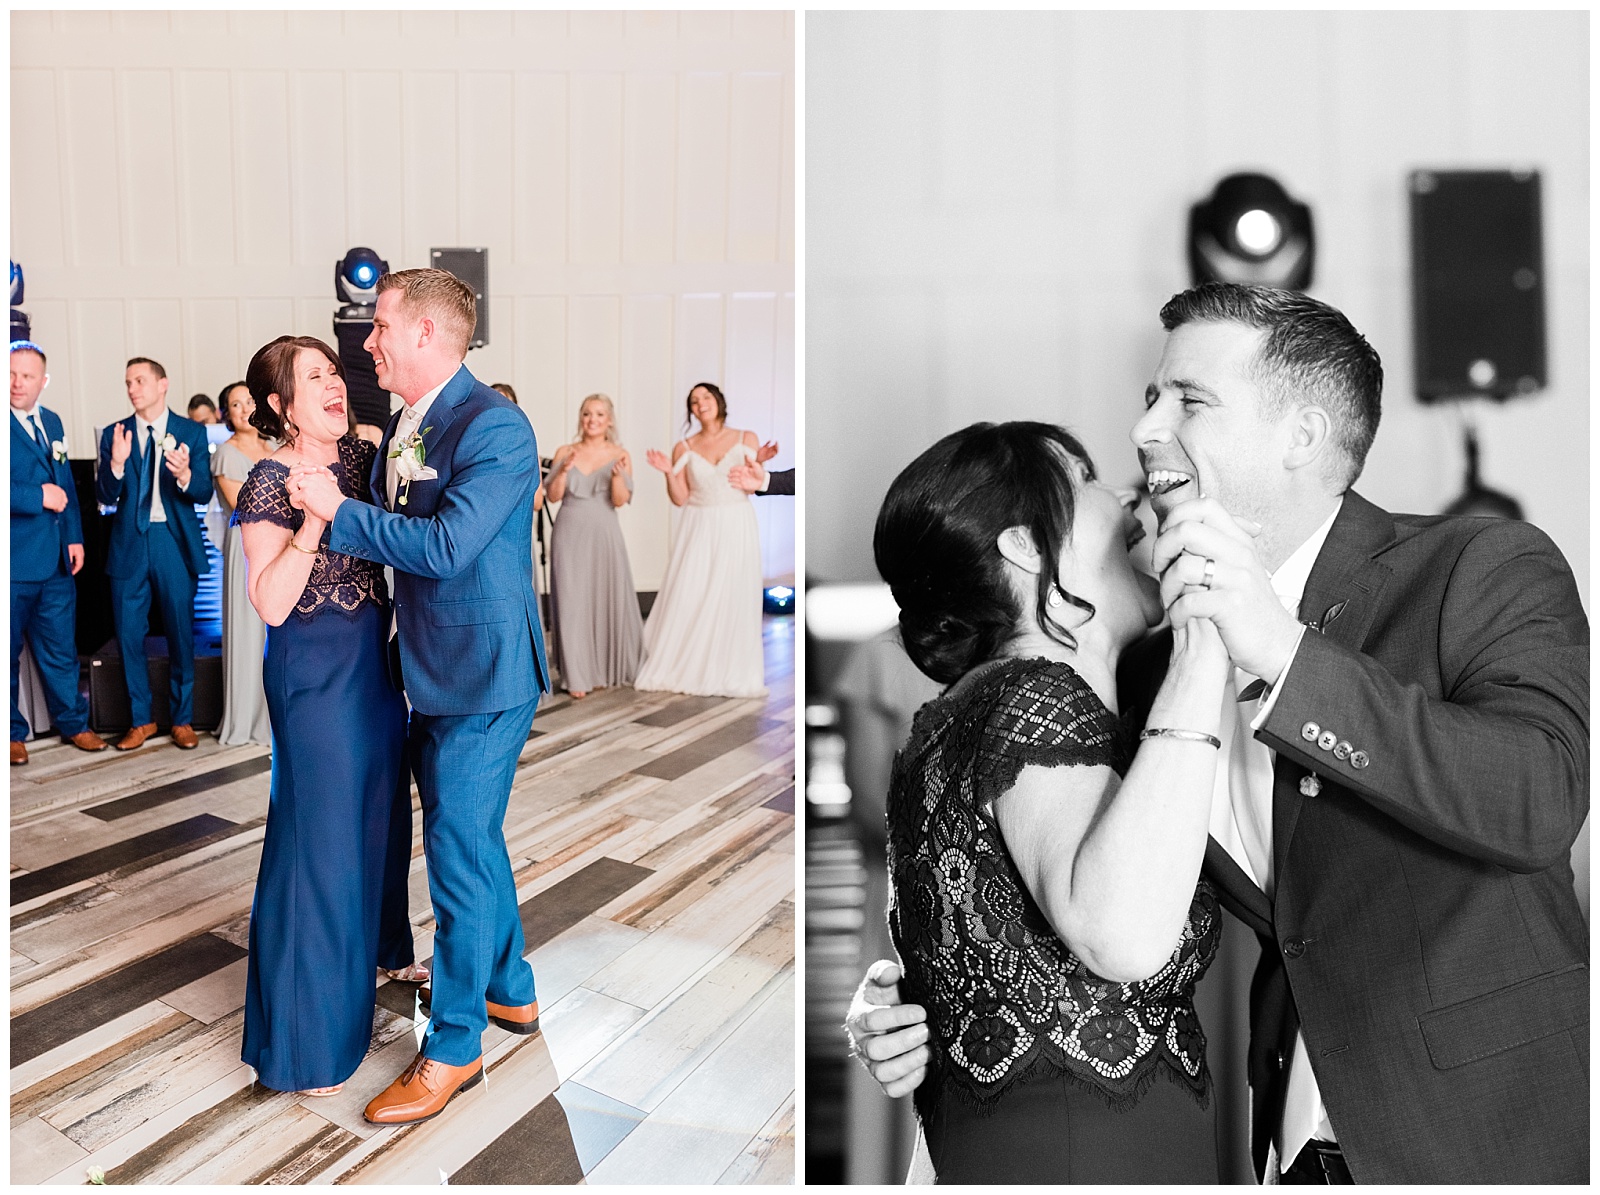 Groom dances with his mother during parent dances.